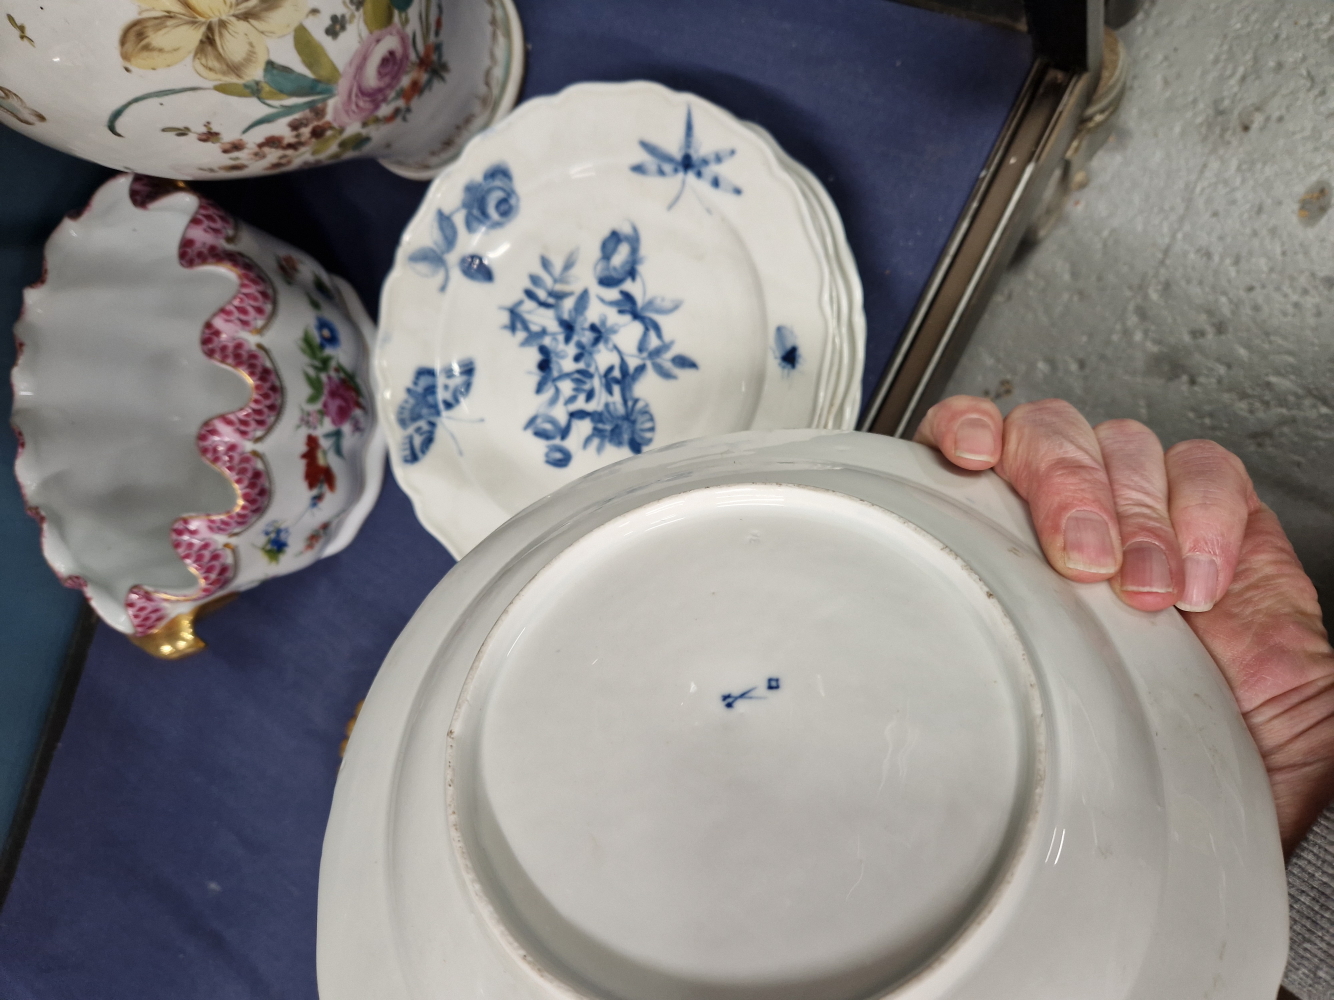 A SET OF SIX BLUE AND WHITE FLORAL PLATES, CROSSED SWORDS MARKS, TWO ENGLISH SOUP PLATES, A - Image 4 of 6